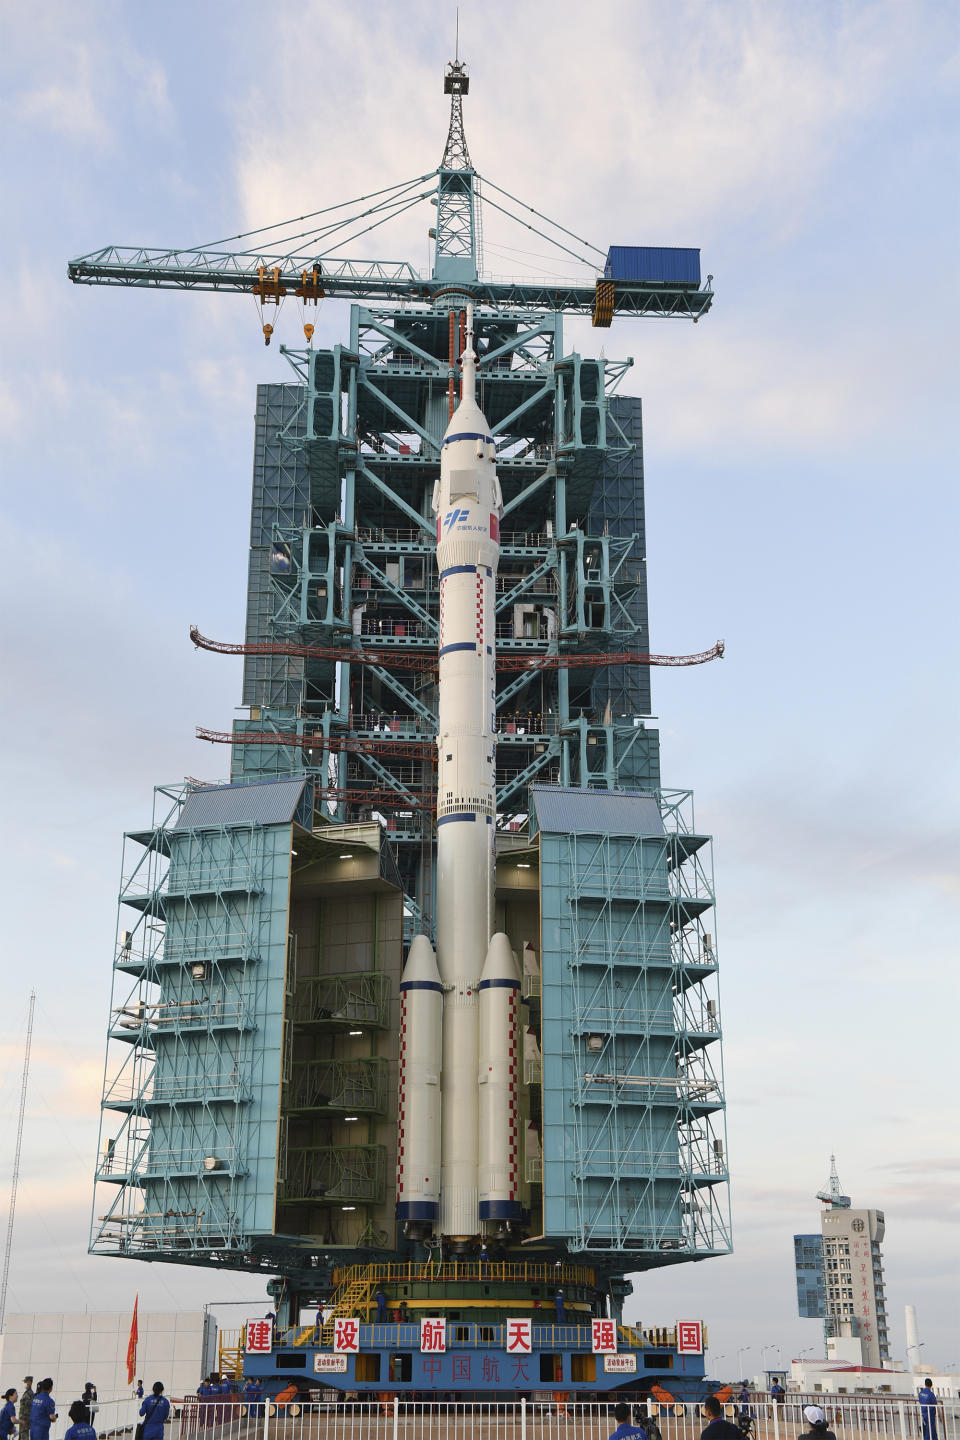 In this photo released by Xinhua News Agency, the Shenzhou-12 manned spaceship with its Long March-2F carrier rocket is being prepared at the launching area of Jiuquan Satellite Launch Center in northwestern China Gansu province, on Wednesday, June 9, 2021. A three-man crew of astronauts will blast off in June for a three-month mission on China's new space station, according to a space official who was the country's first astronaut in orbit in May. (Wang Jiangbo/Xinhua via AP)